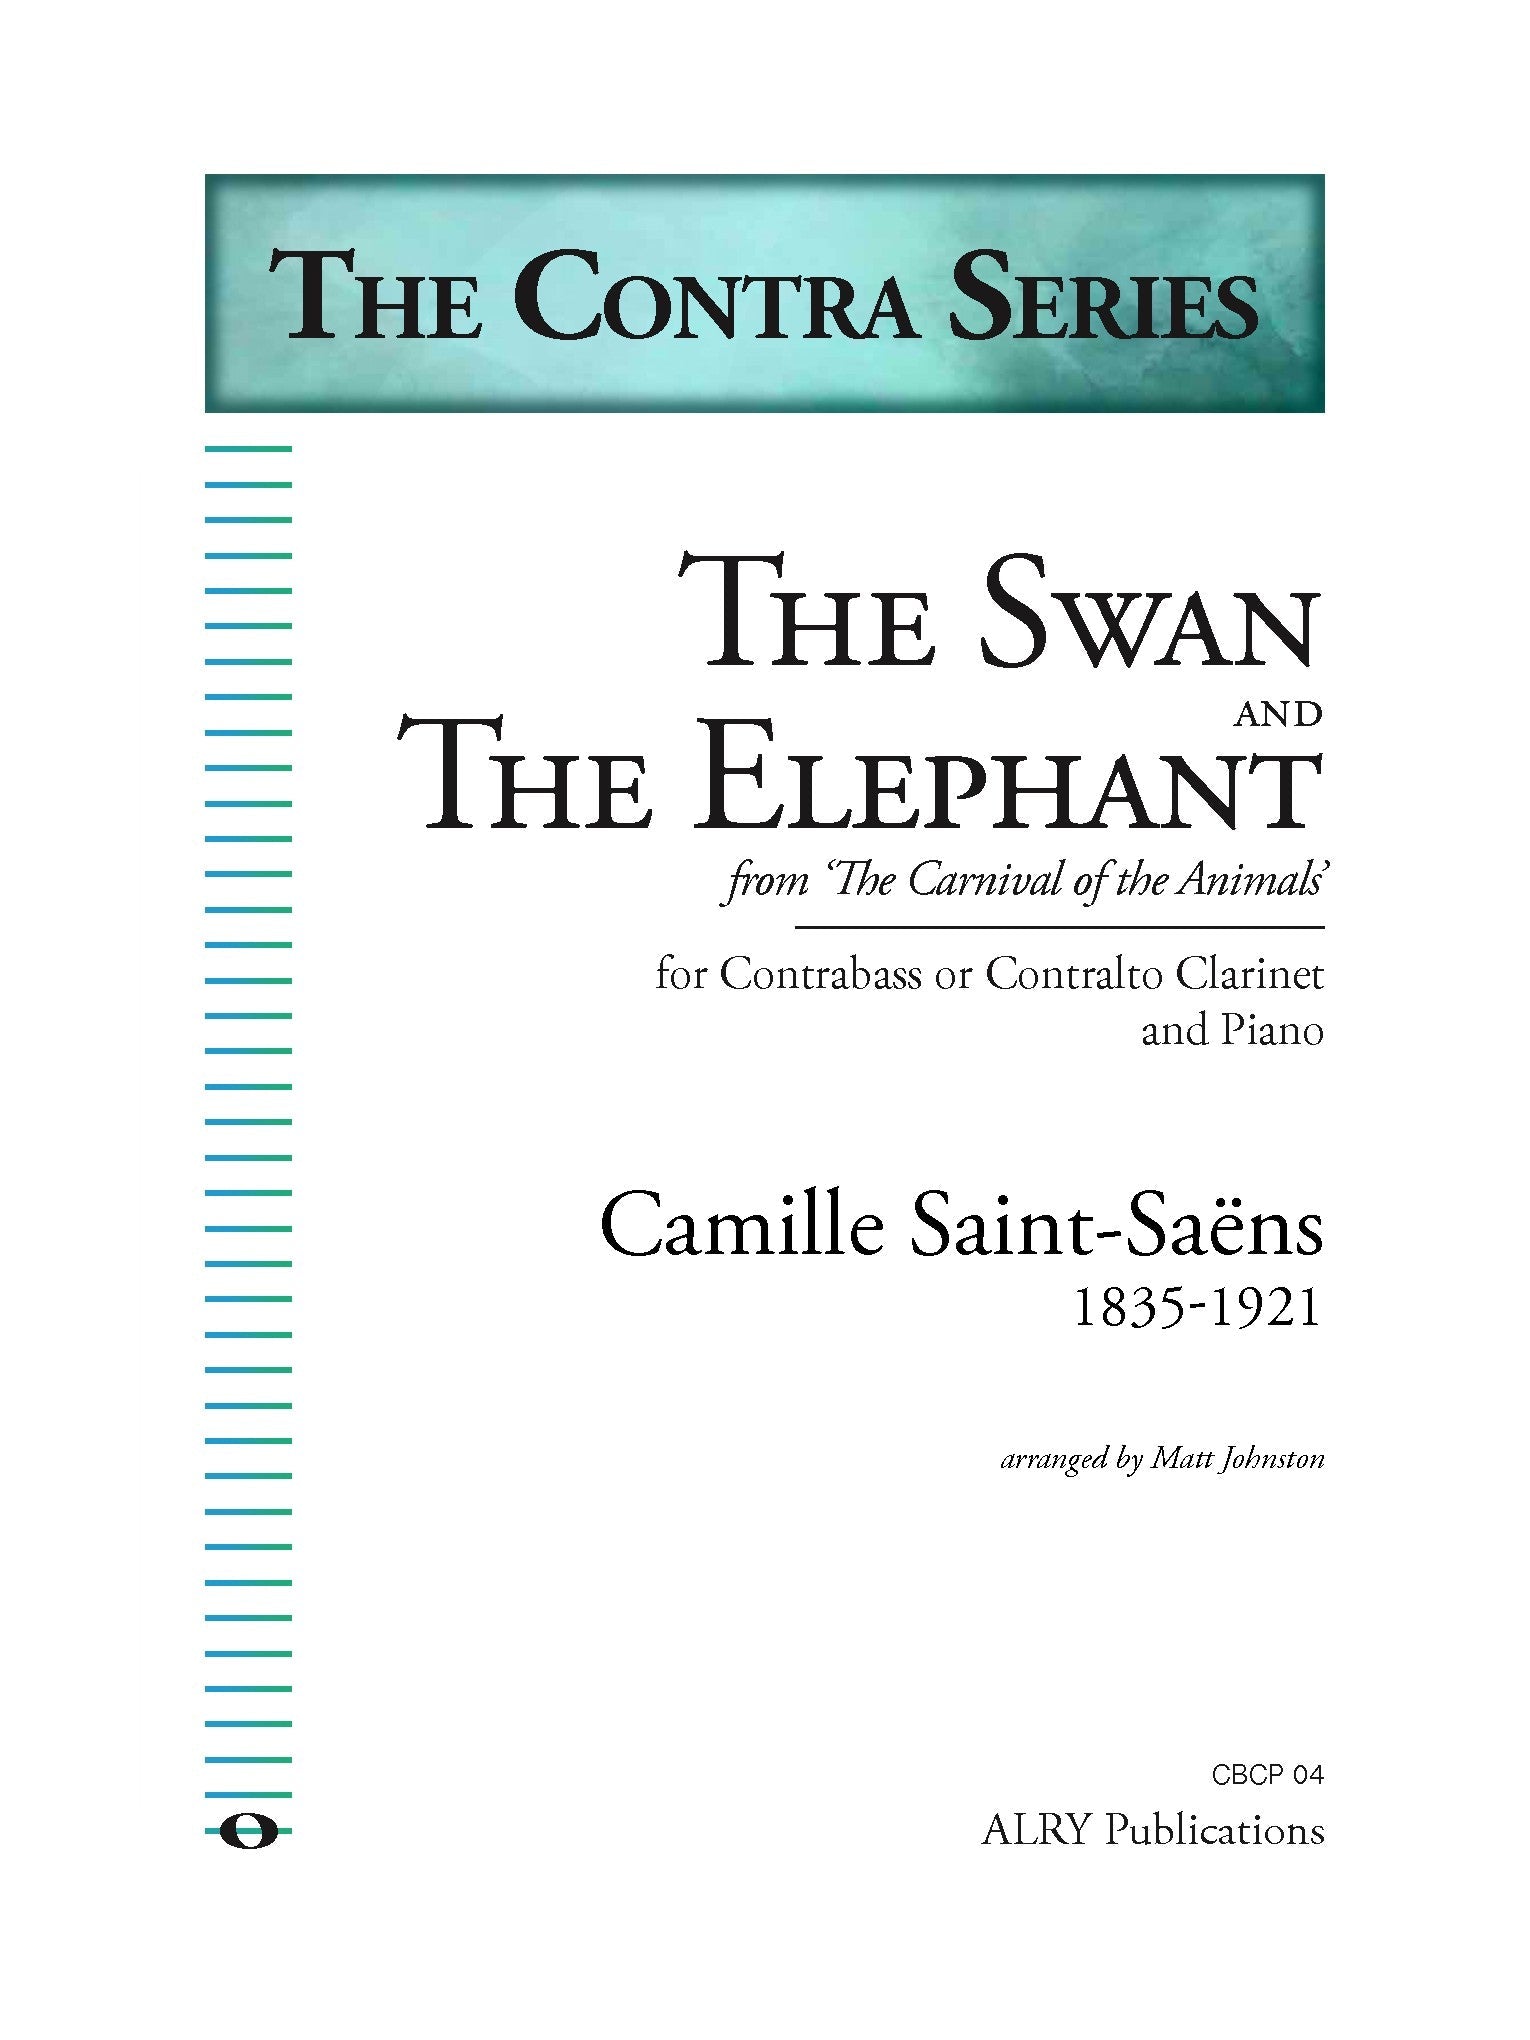 Saint-Saens - The Swan and The Elephant from The Carnival of the Animals